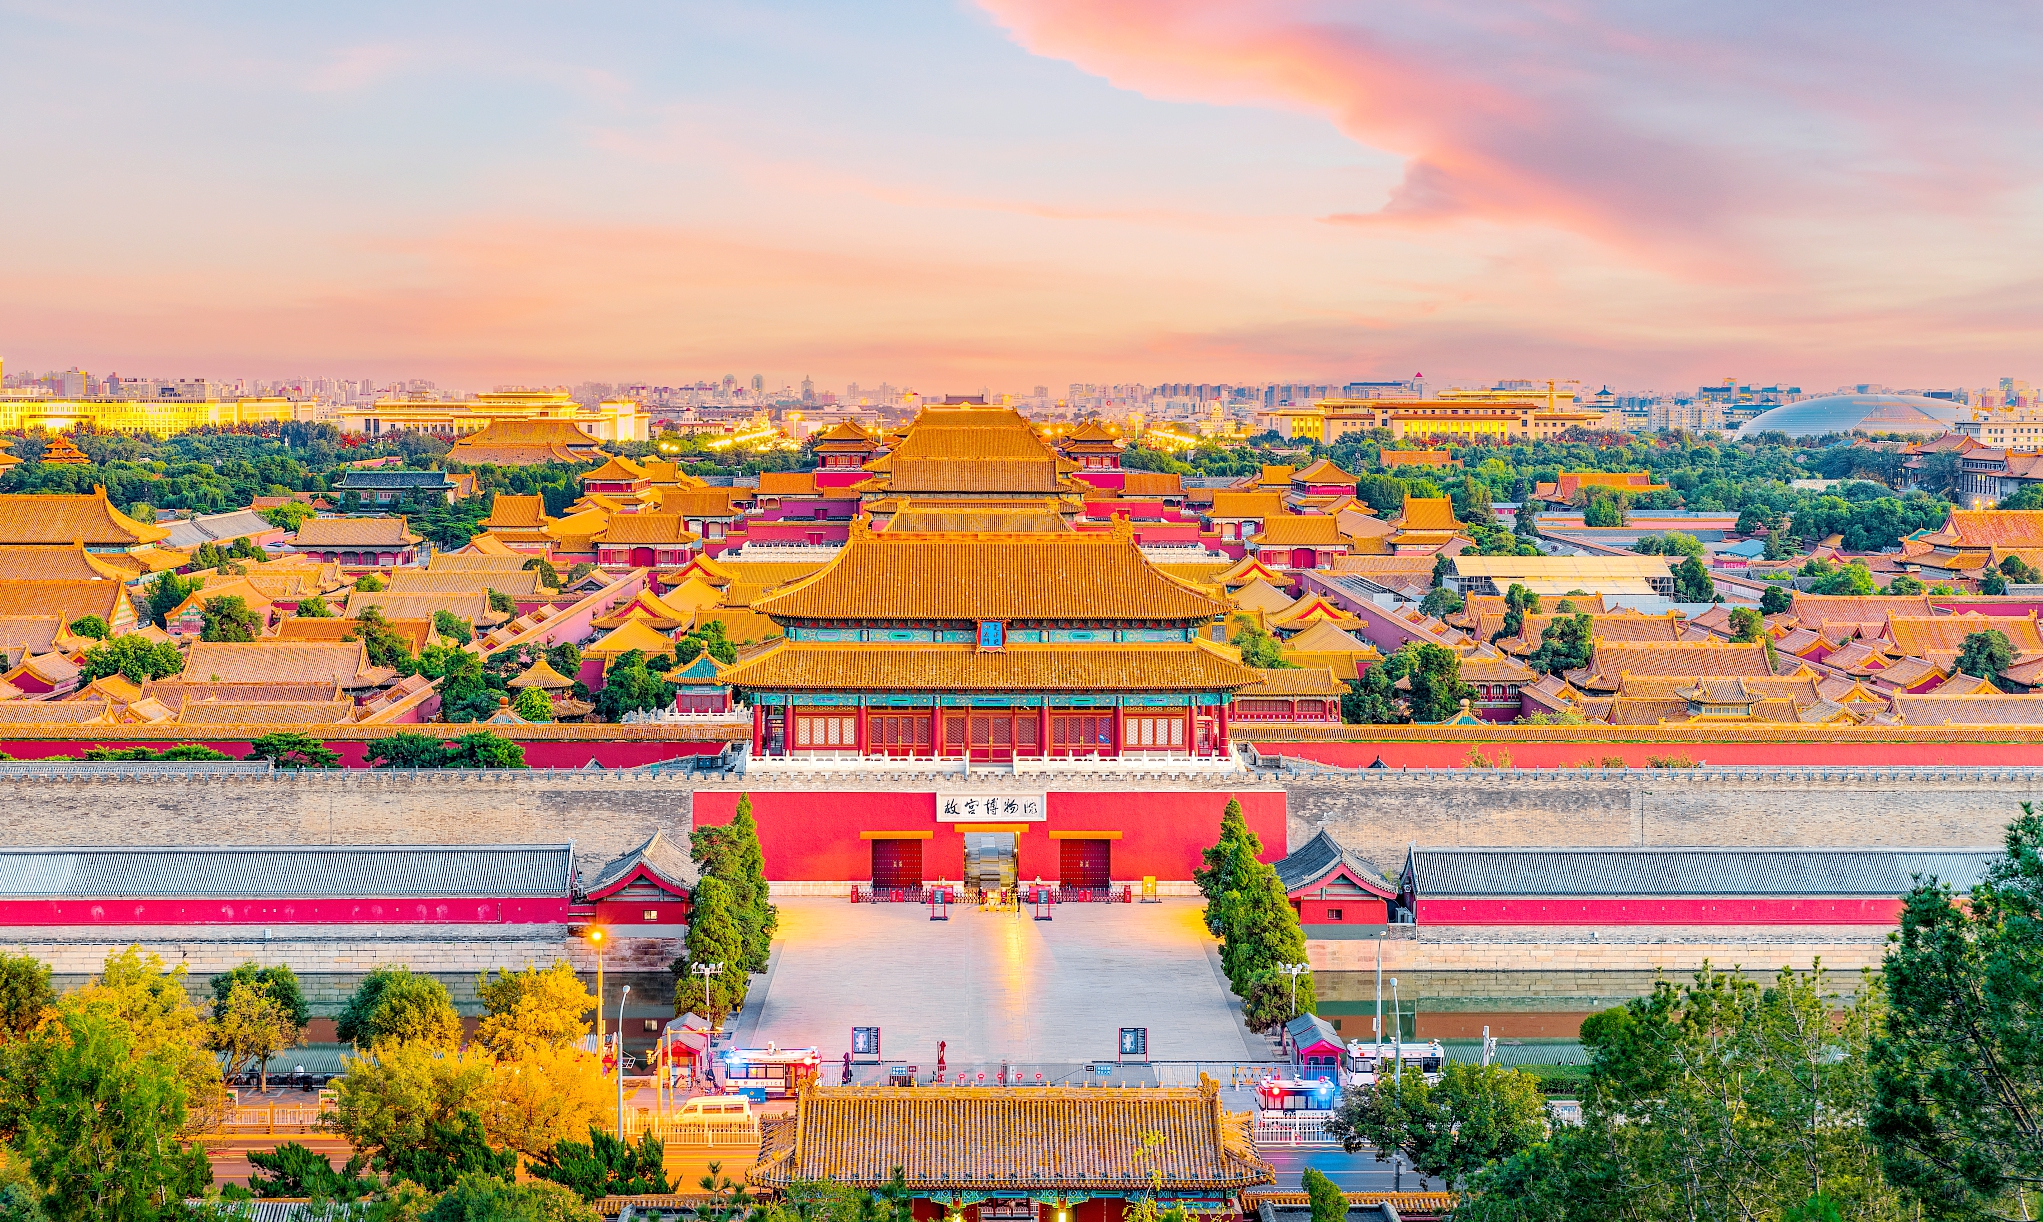 A file photo shows an aerial view of the Palace Museum, also known as the Forbidden City, situated along the Beijing Central Axis. /CFP